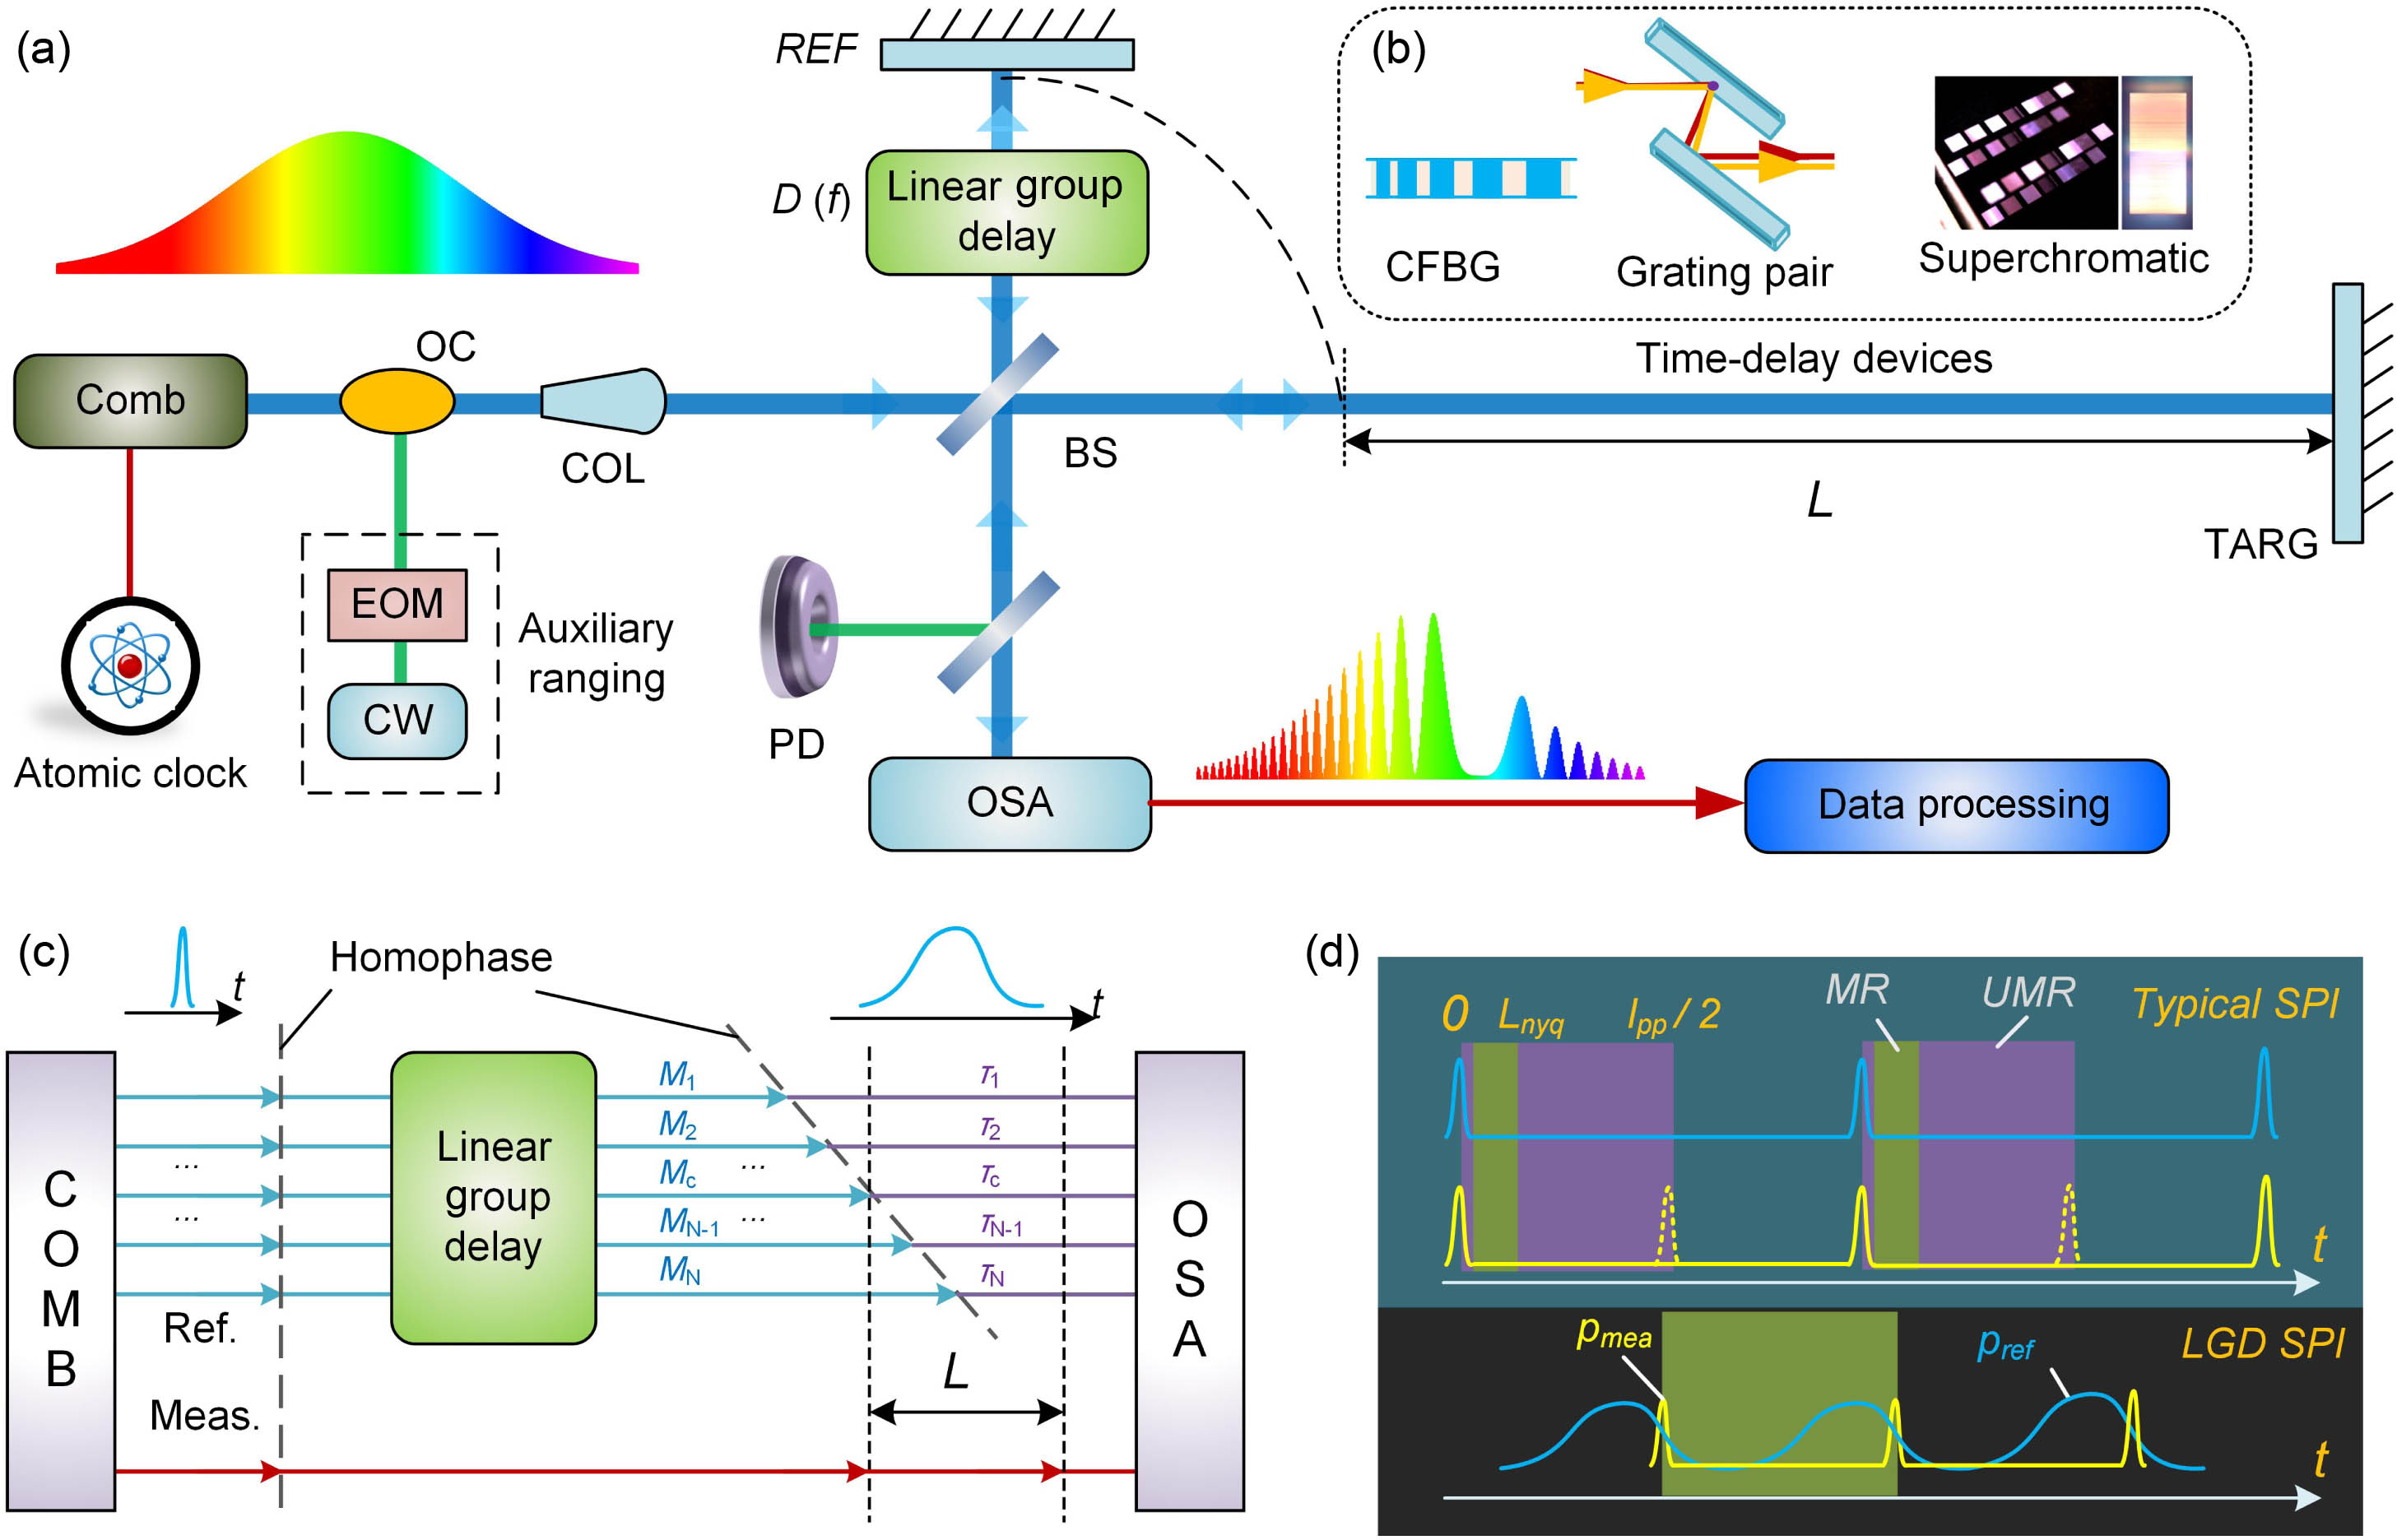 (a) Schematic overview of the proposed linear group delay spectral interferometry for full-range nanometric precision length metrology. (b) Several methods for introducing linear group delay, including metasurfaces, carefully designed arrays of gratings, photonic integrated circuits (PICs), and customized chirped fiber Bragg gratings (CFBGs). (c) Different modes of the OFC are introduced with a linear time delay centered around the center mode. (d) Comparison between the proposed LGD-SPI and typical SPI. Our proposed approach offers a more convenient means of referencing light and measuring light, which facilitates interference occurrence and eliminates measurement dead zones. Comb, optical frequency comb; EOM, electro-optic modulator; SPI, spectral interferometry; OC, optical coupler; Col, collimator; CW, continuous wave laser; REF, reference mirror; TARG, target mirror; OSA, optical spectrum analyzer; PTT, phase transition tracking; UMR, unmeasurable region; MR, measurable region.